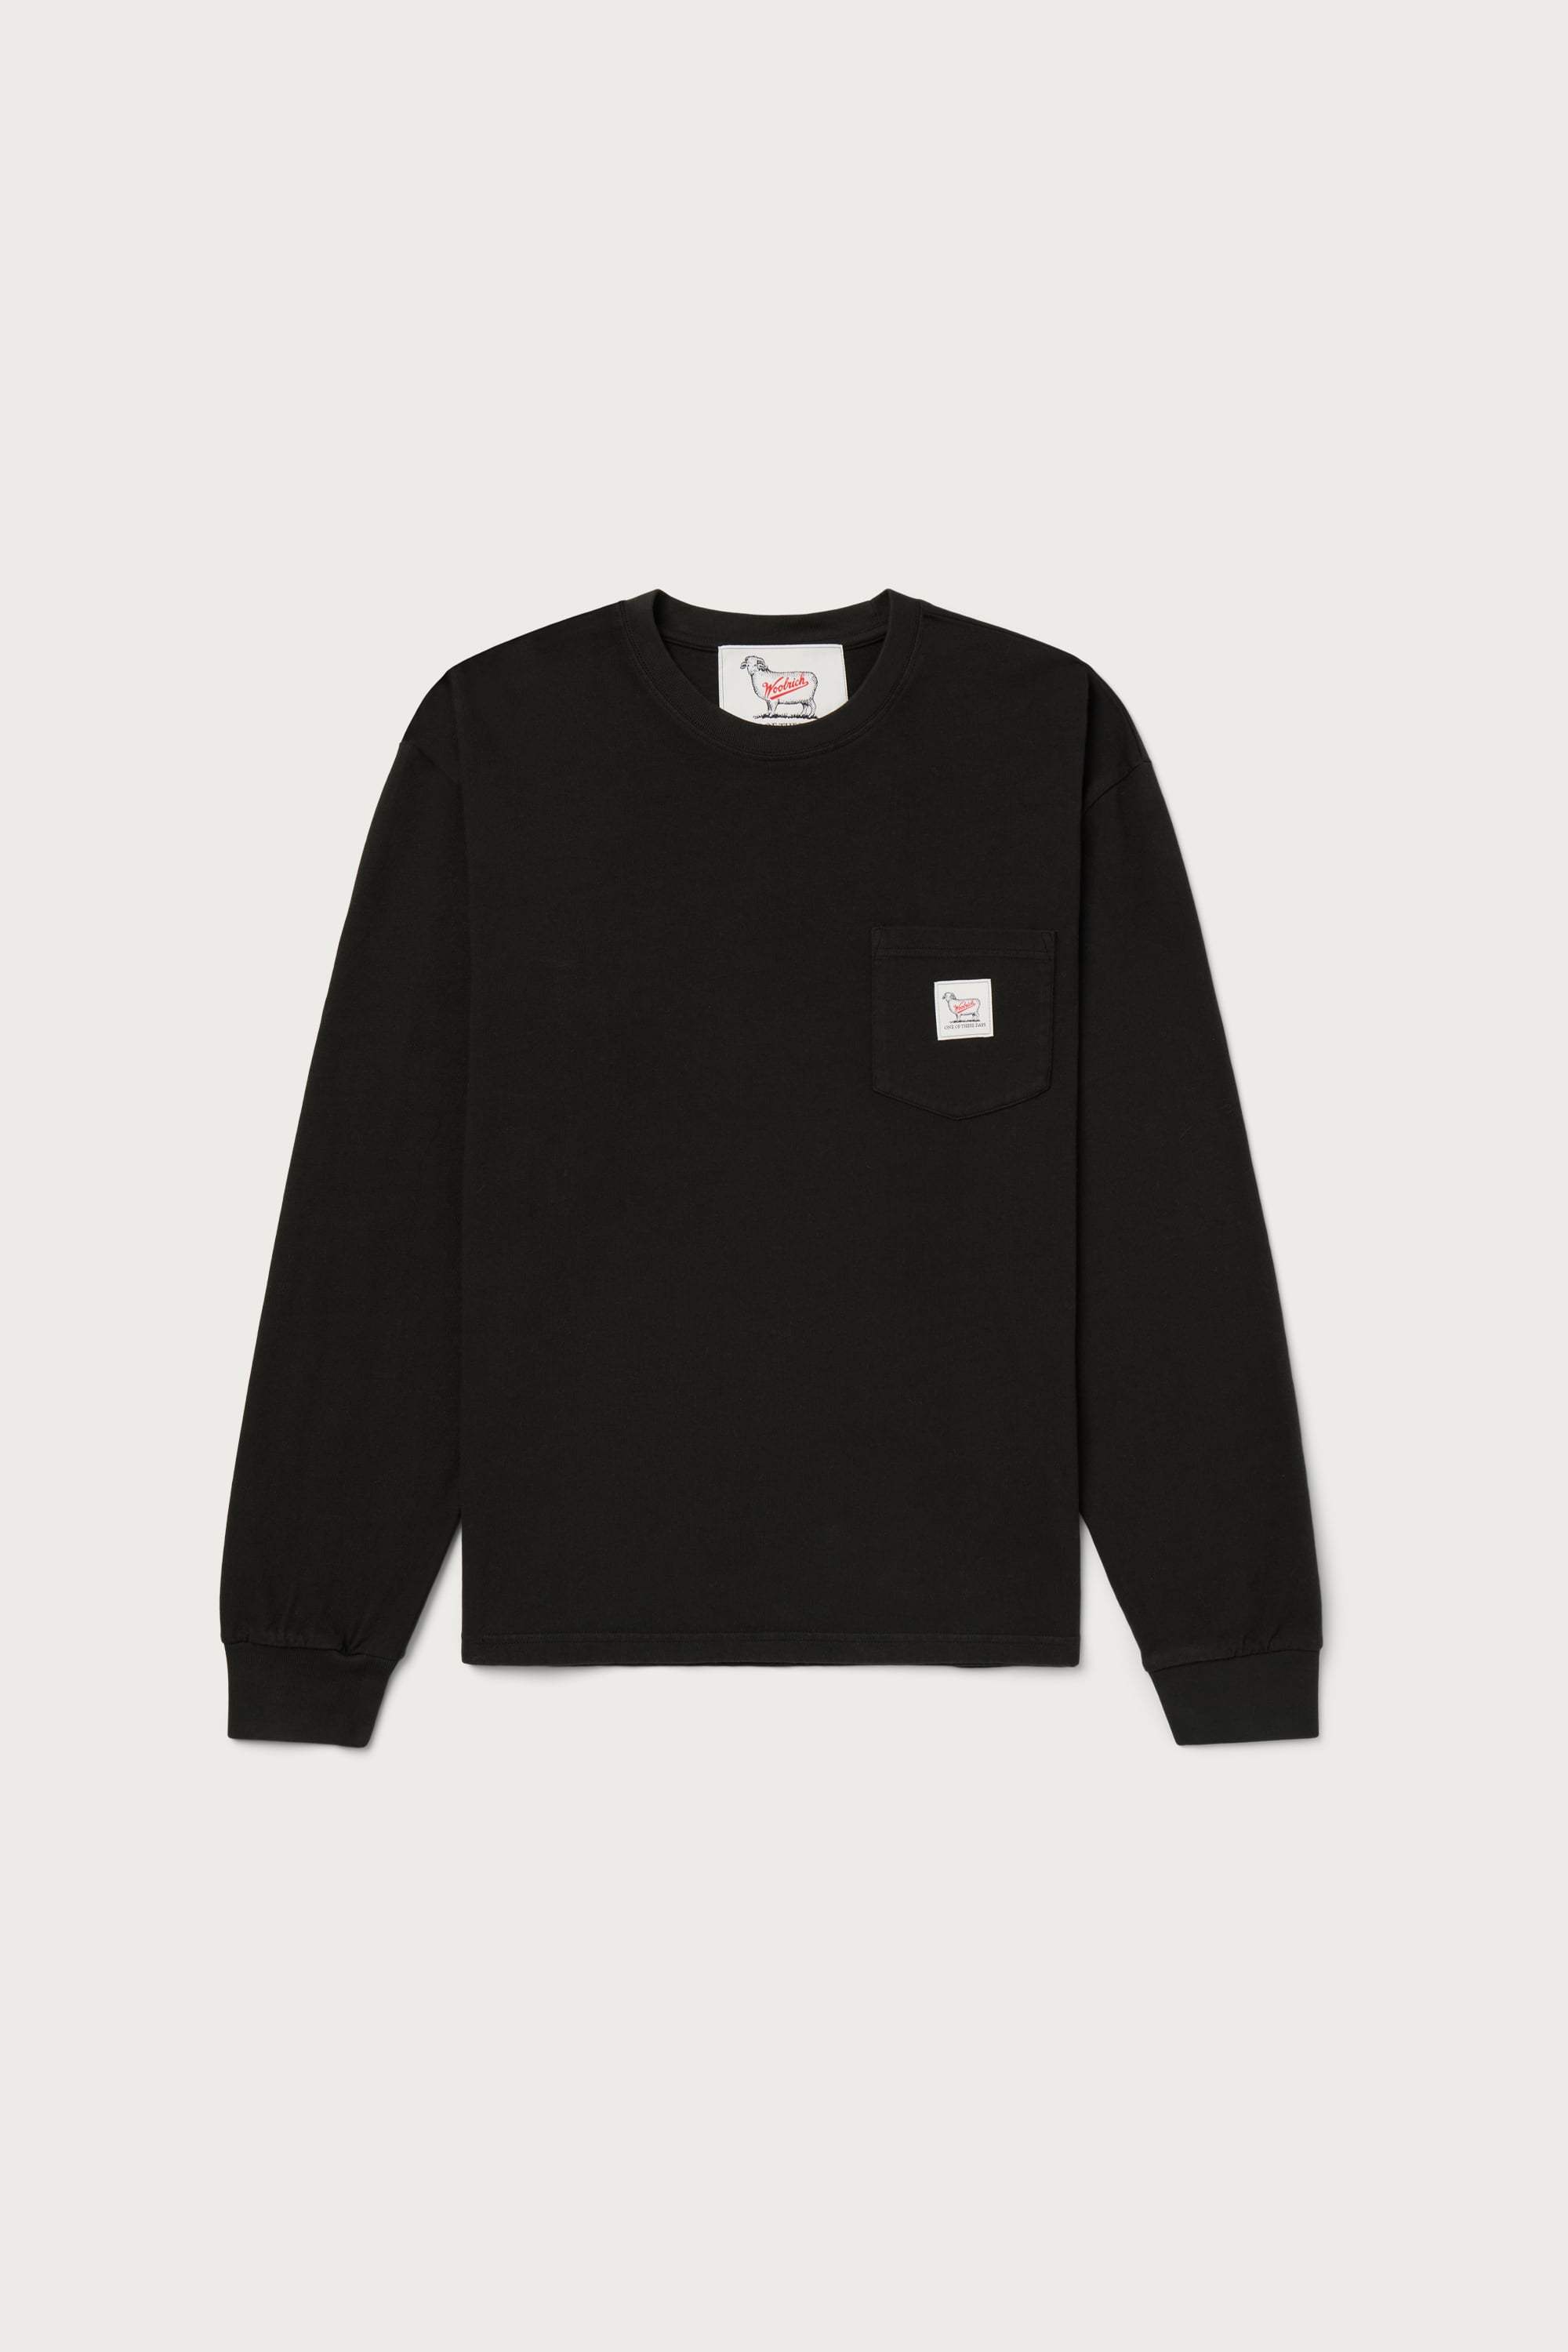 【ONE OF THESE DAYS】LONG SLEEVE POCKET TEE